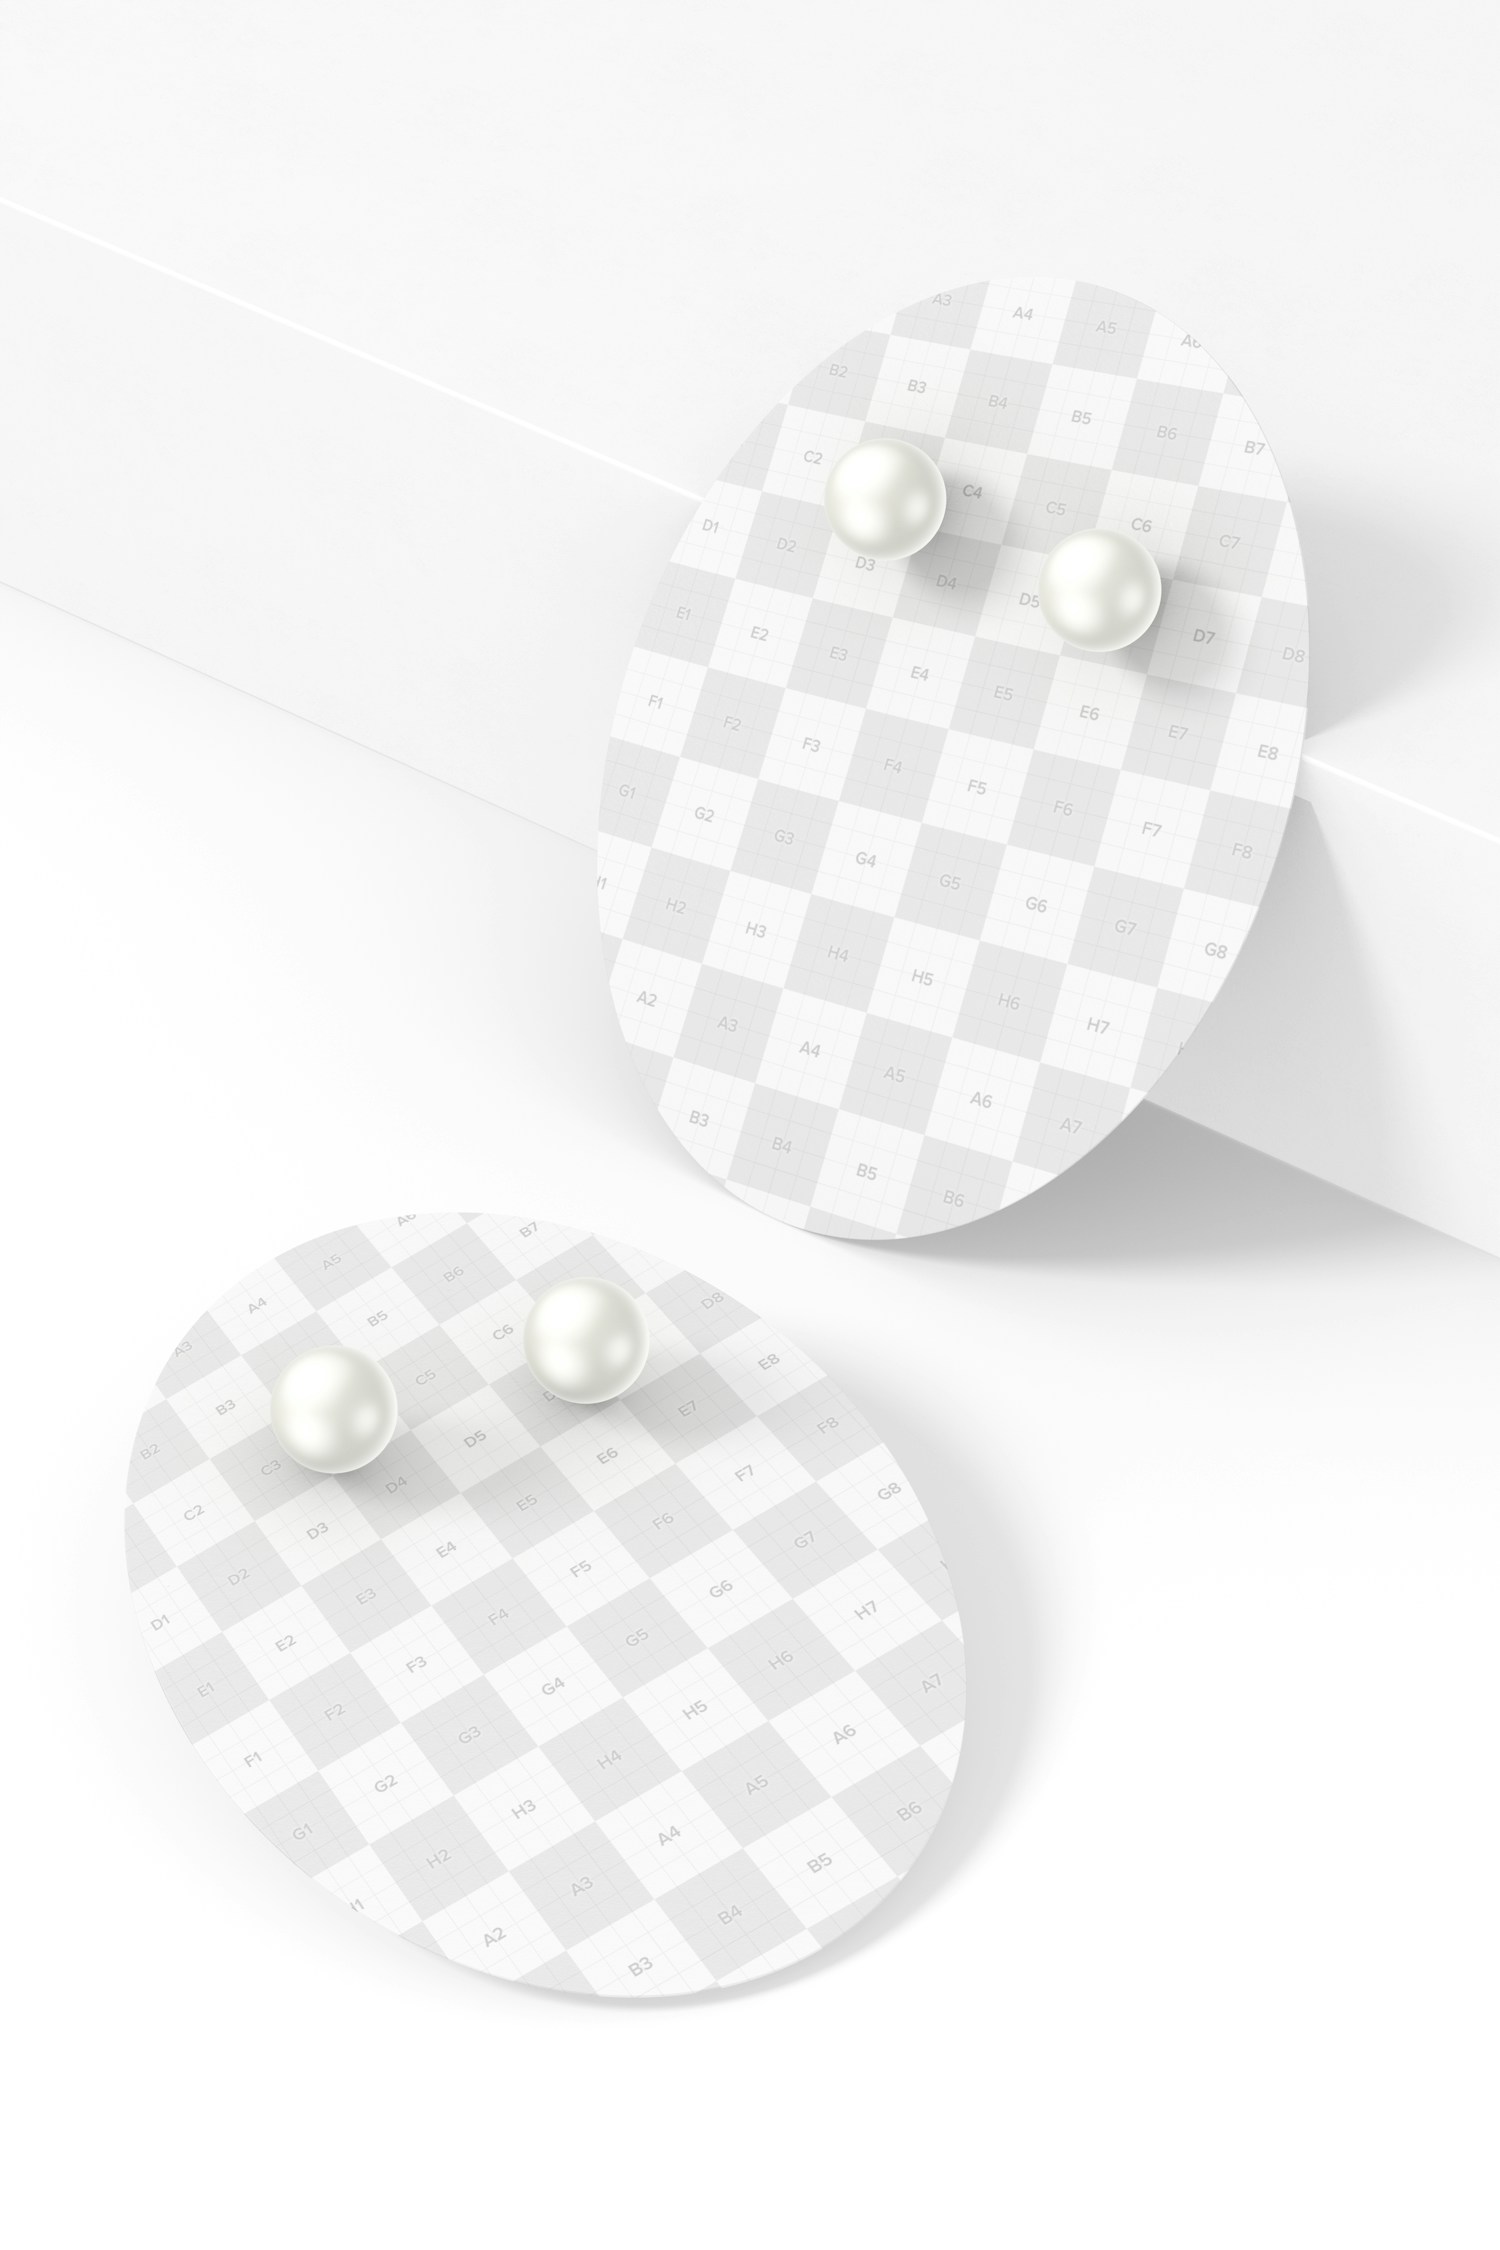 Oval Earring Cards Mockup, Perspective